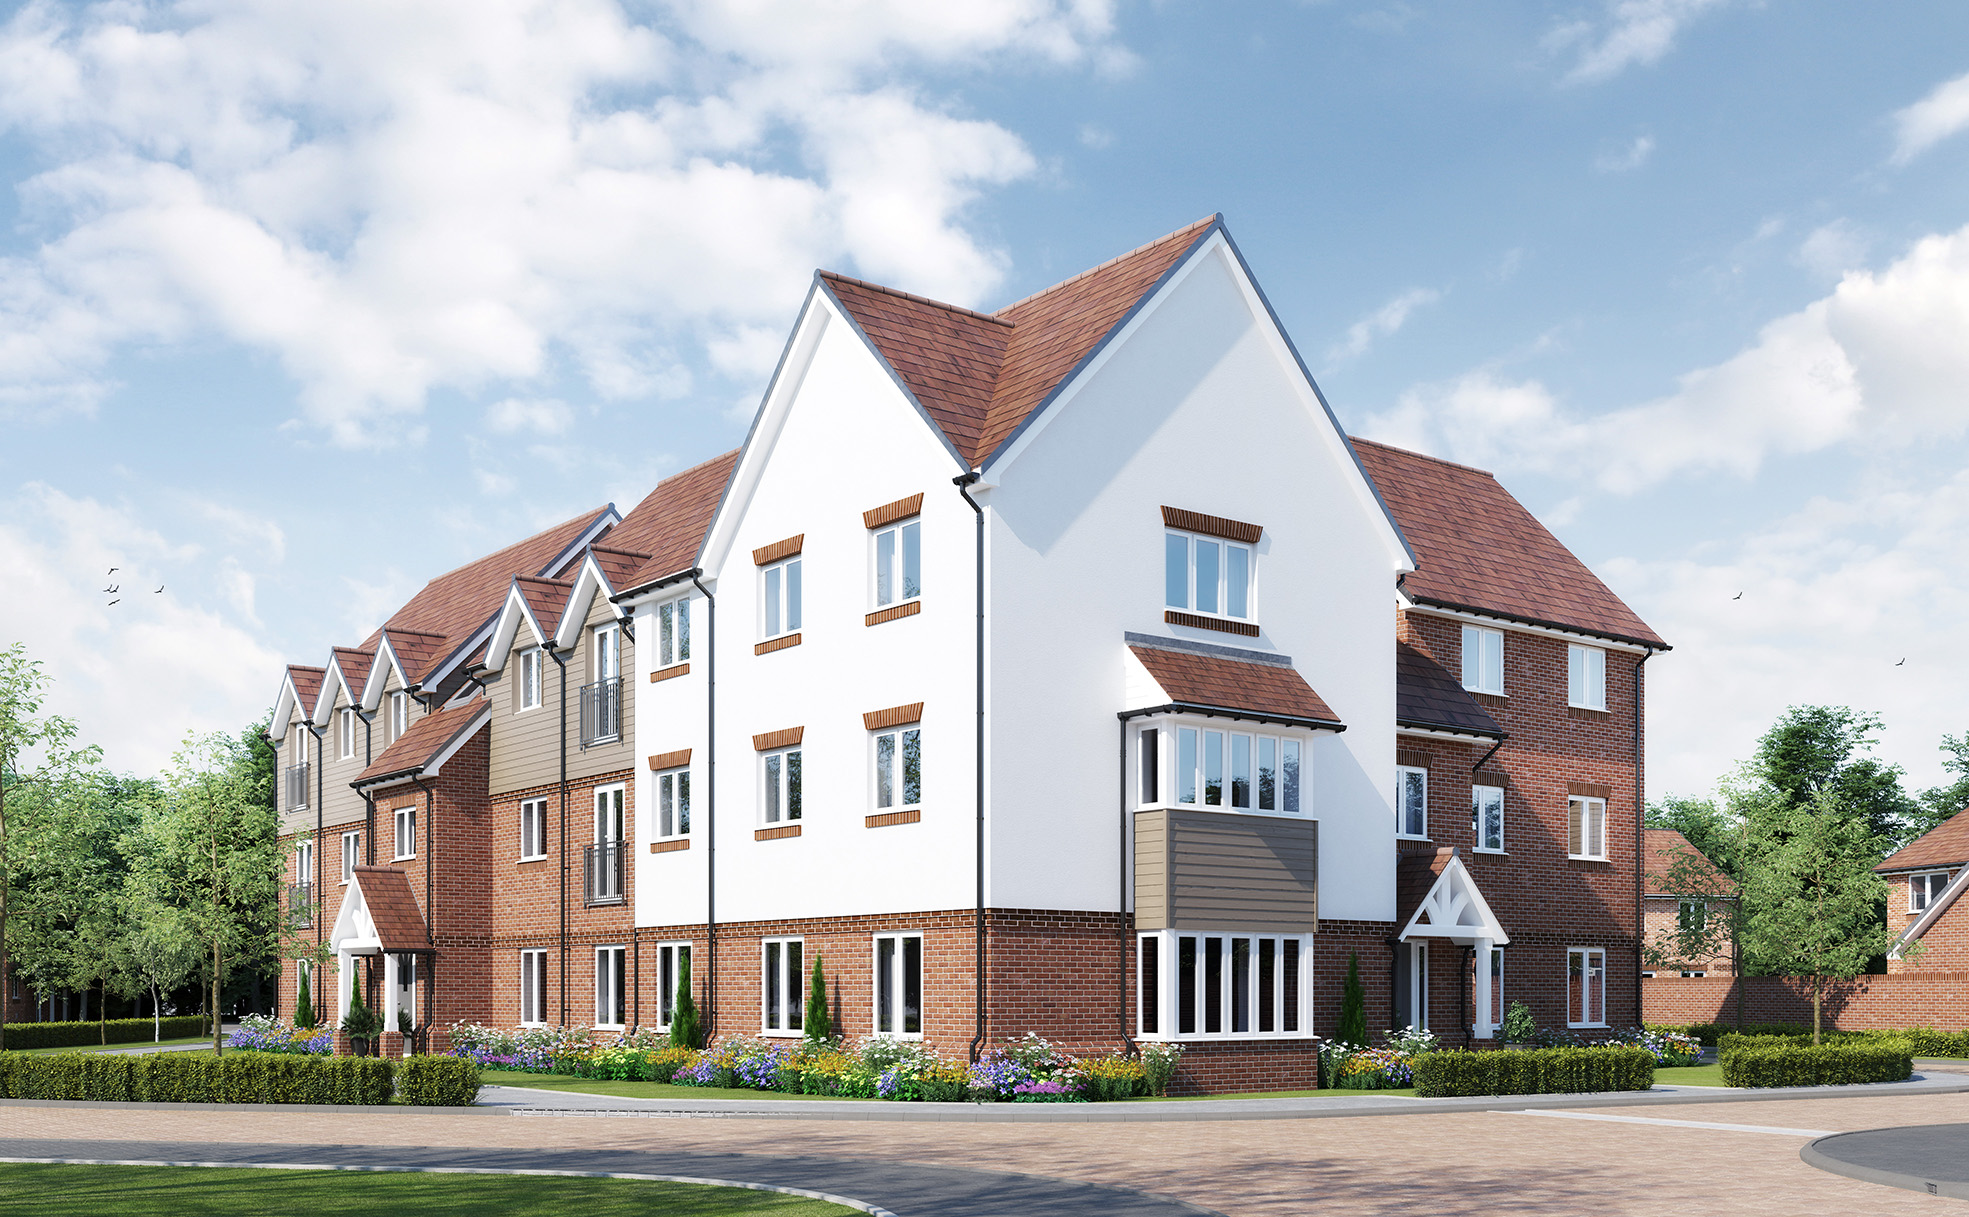 Pennyfarthing Homes helps first-time buyers with affordable deposit option